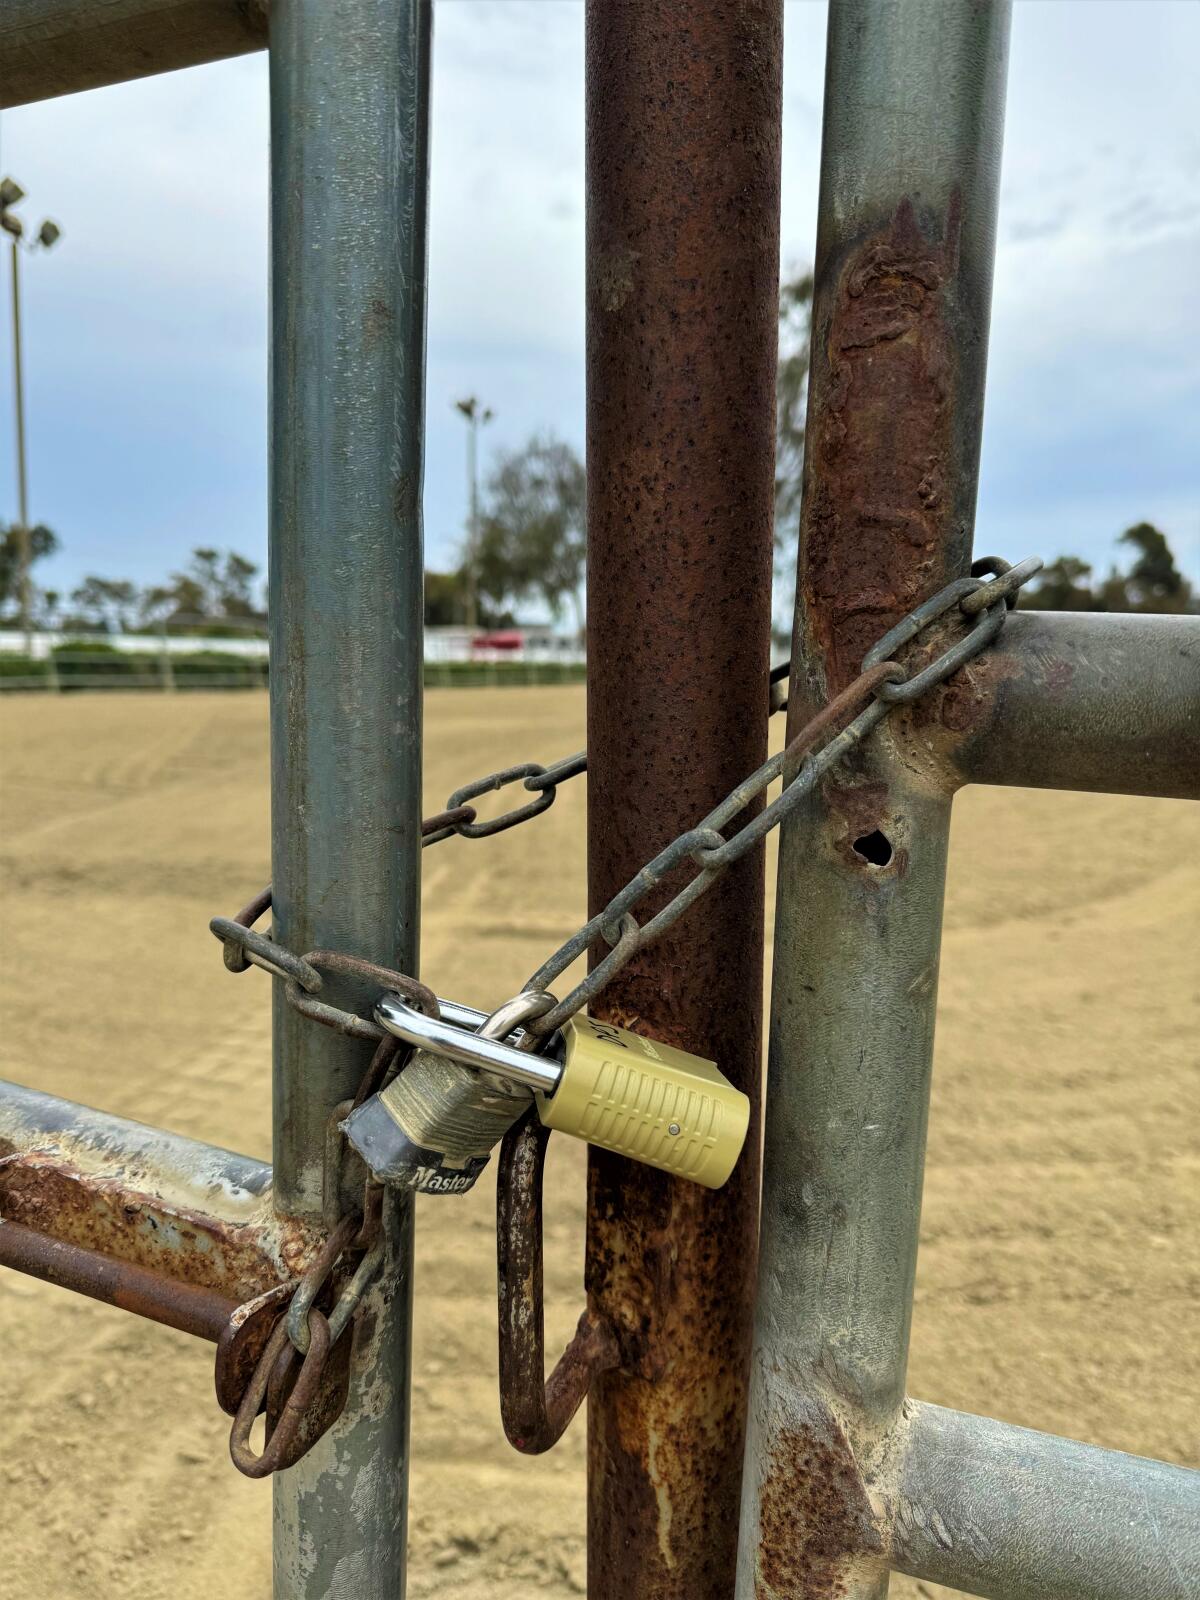 Padlocks installed Thursday, Aug. 1,  on the gate of an arena at the O.C. fairgrounds' Equestrian Center.